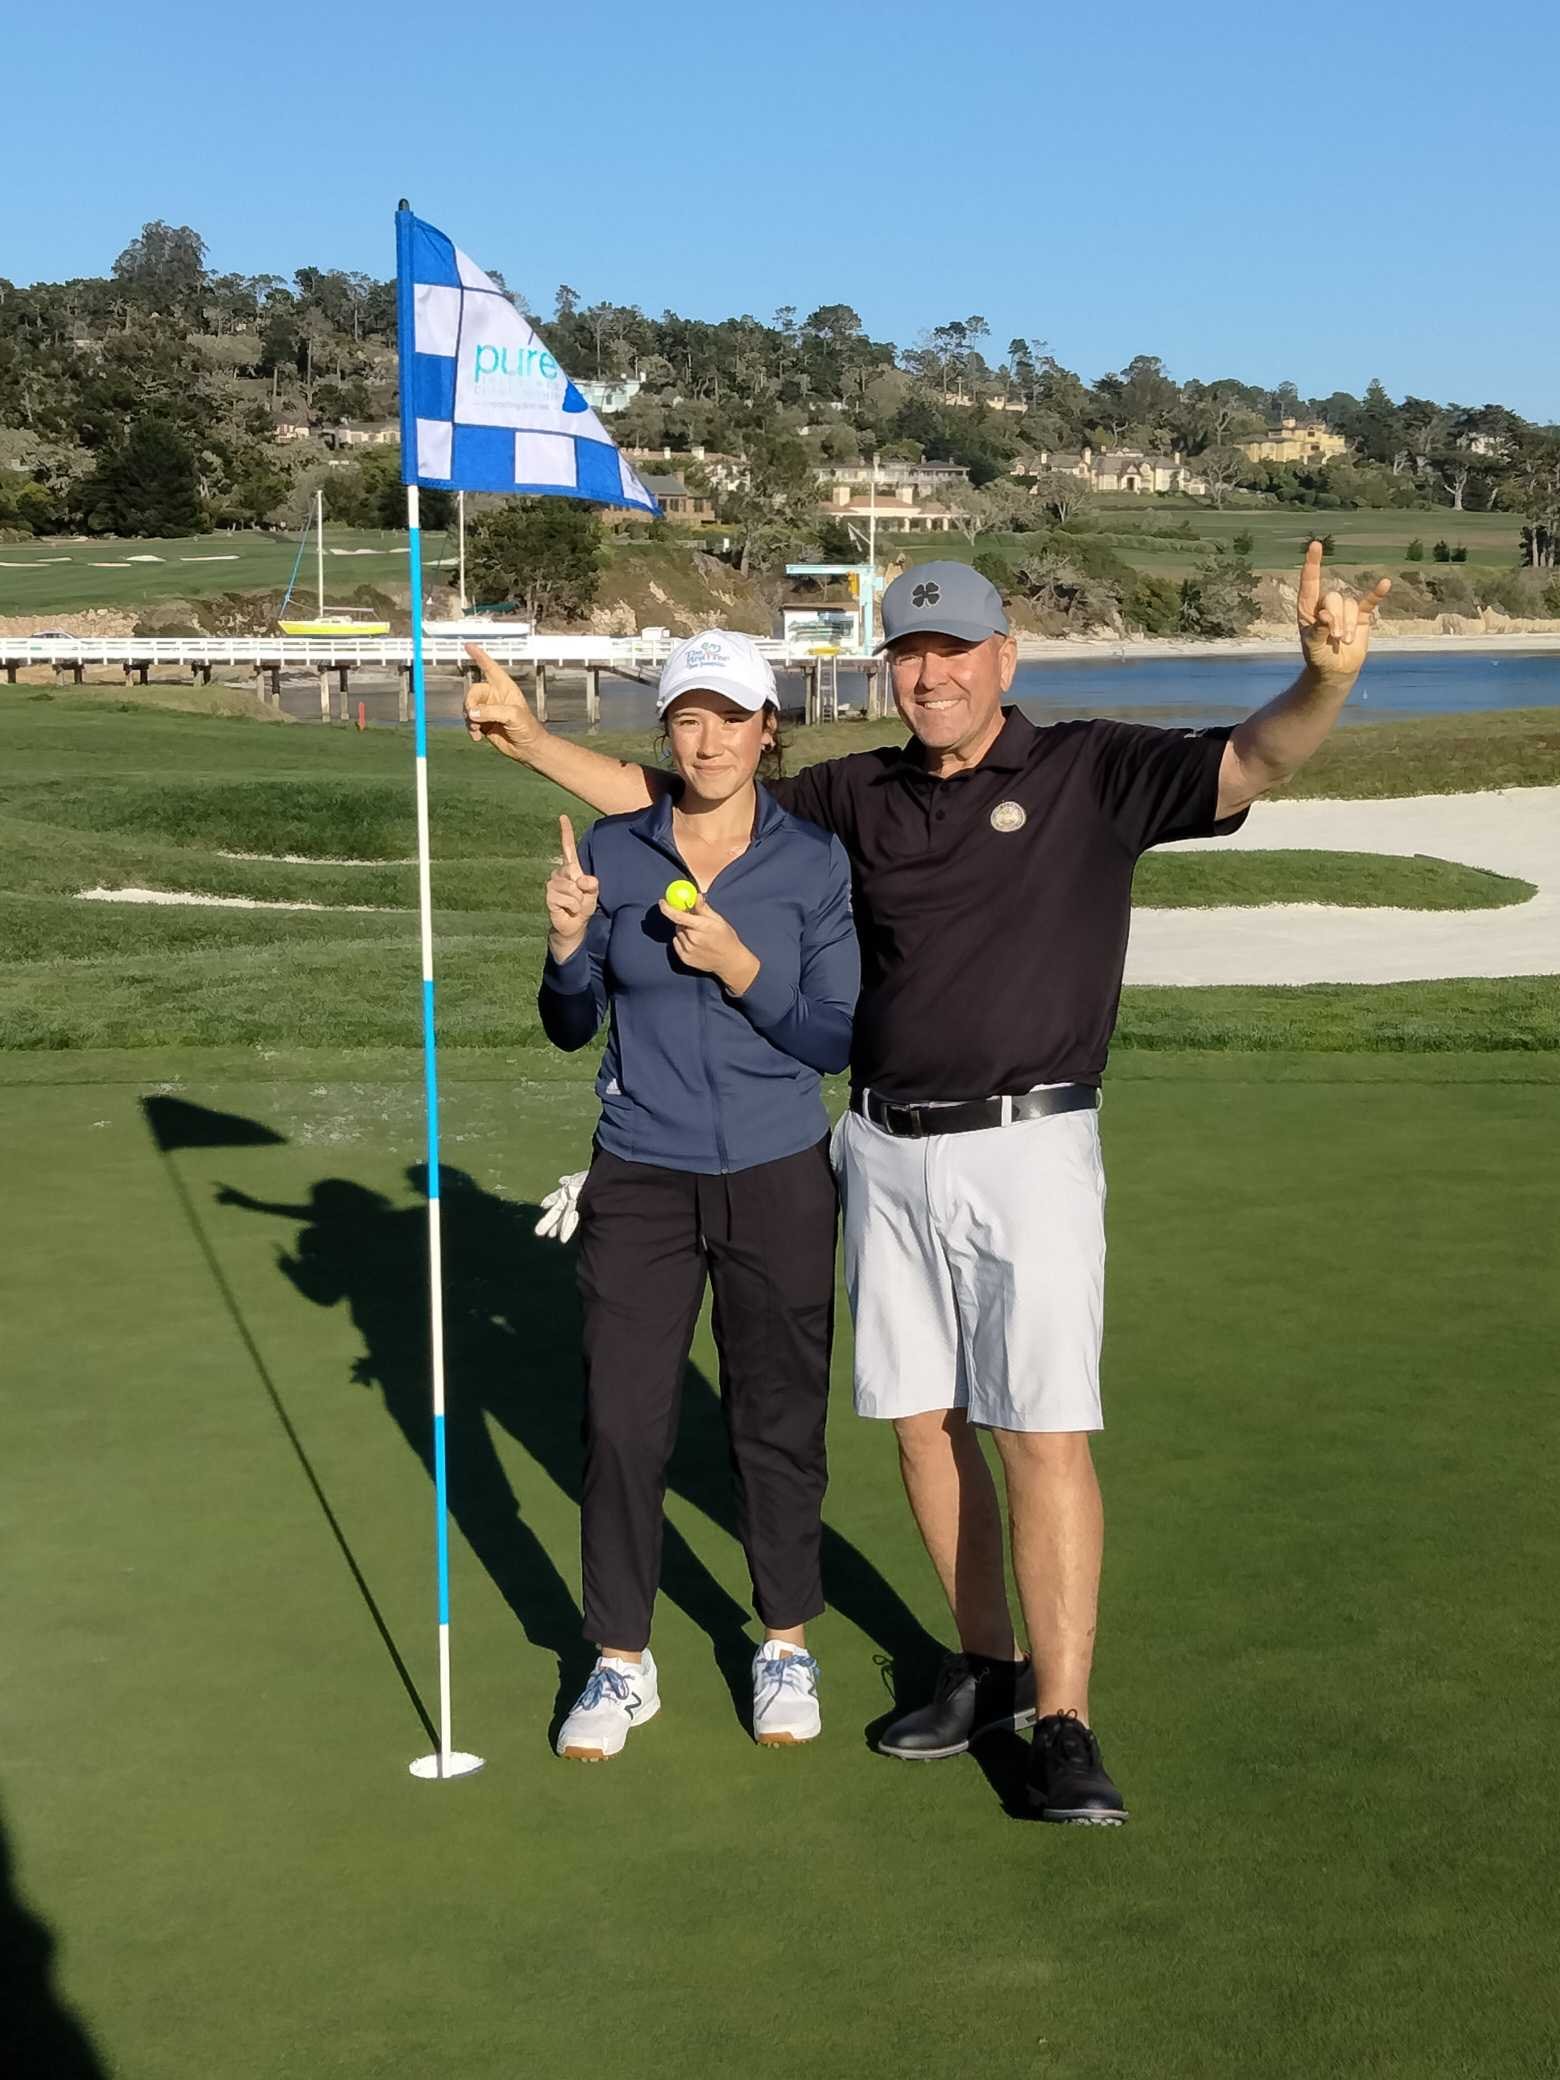 Youth on Course member Theresa Shaw after making a hole-in-one at Pebble Beach Golf Course